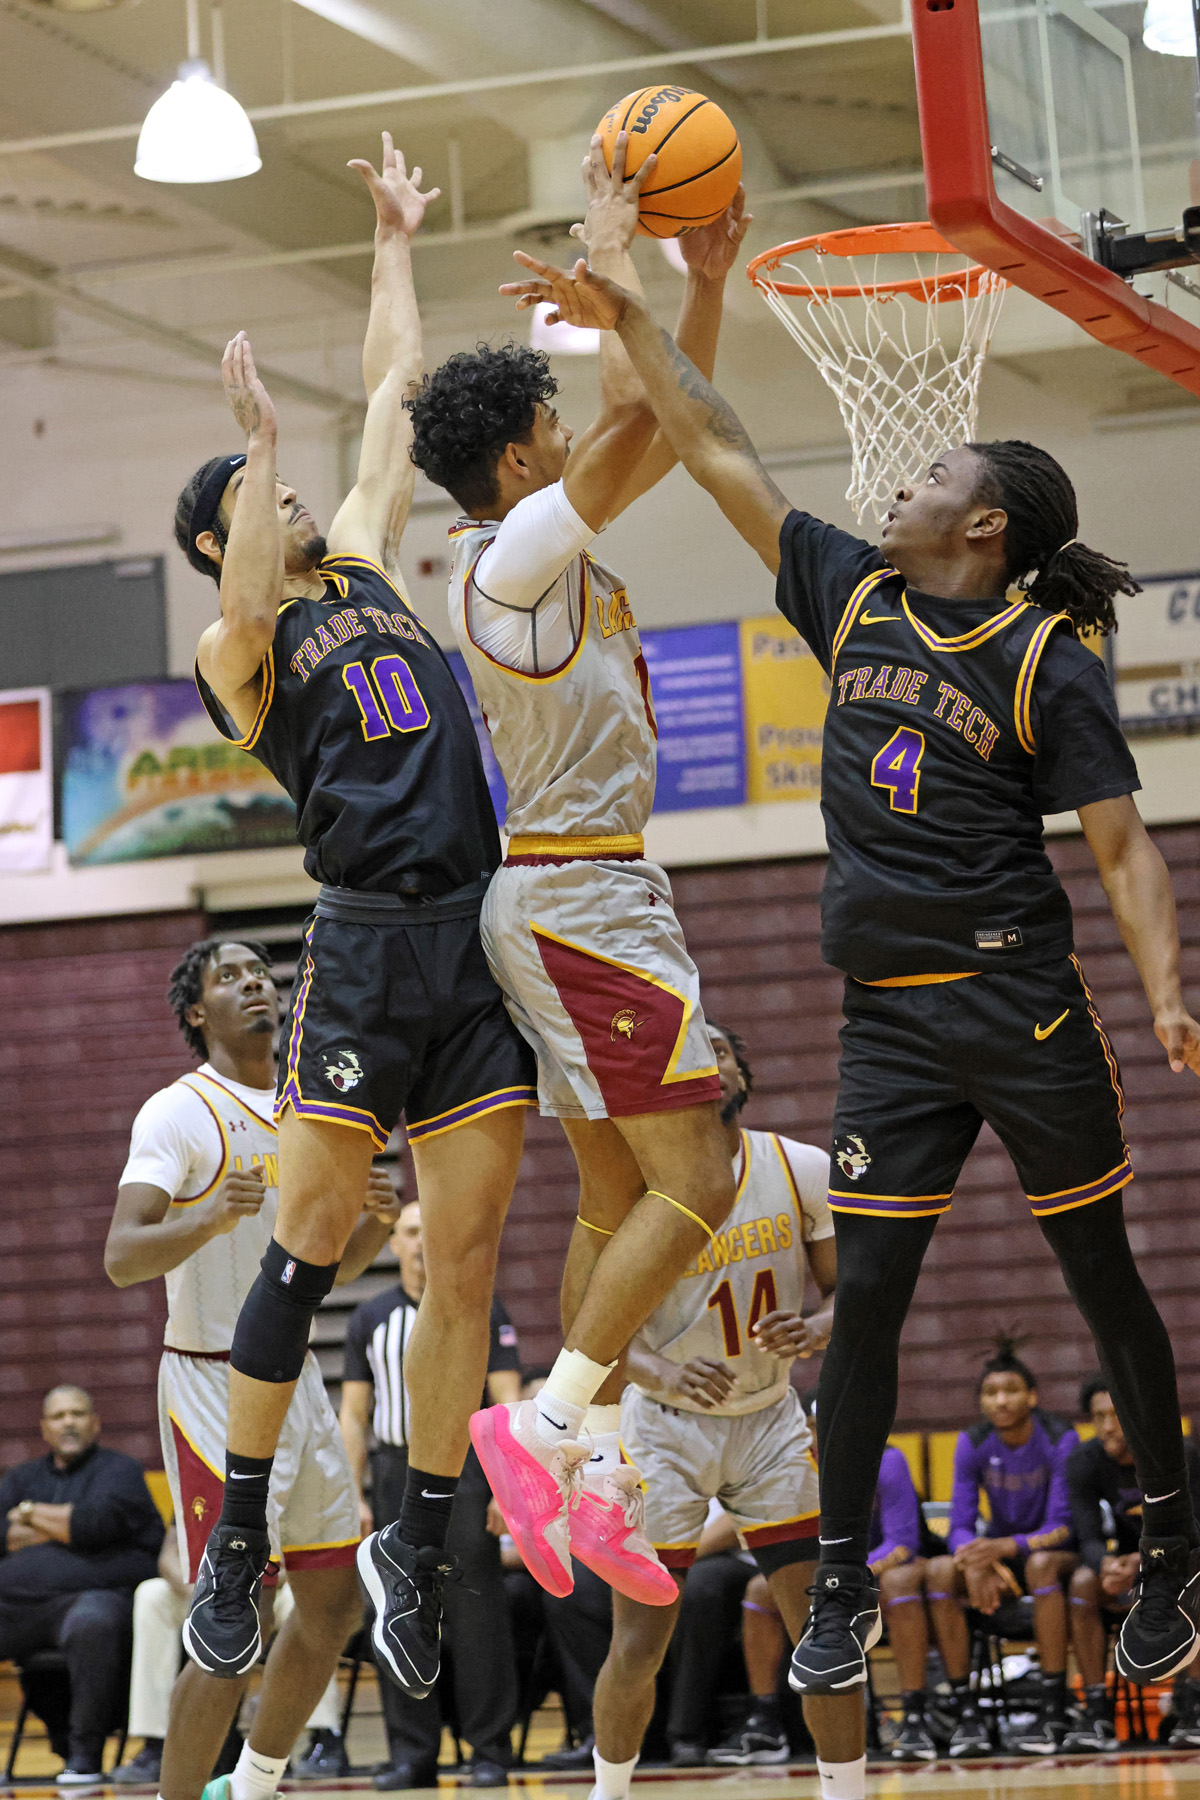 Jalen Vazquez goes up high to the basket on Friday night (photo by Richard Quinton)